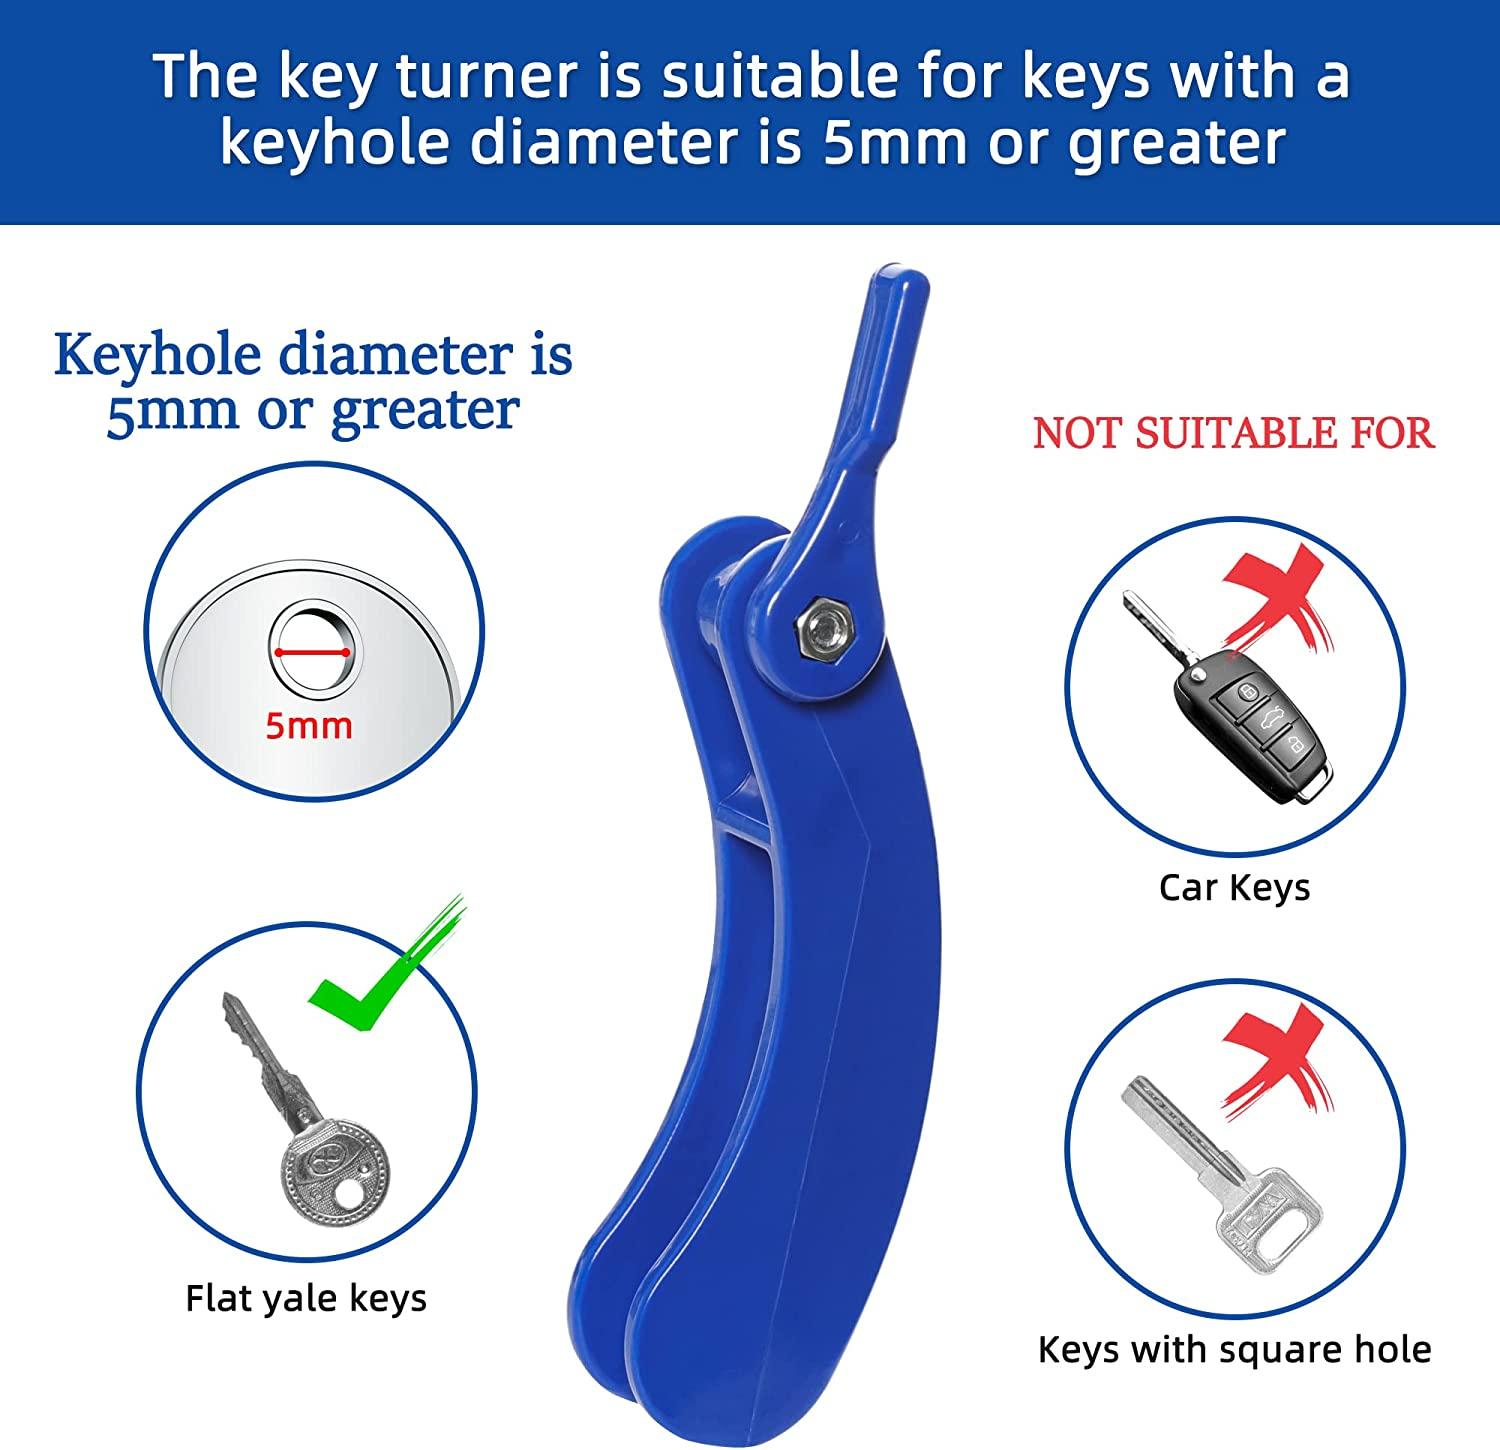 Peermax Turn Right Key Turner Aid for People with Arthritis or weak Hand  Grip | Assist Devices for Elderly and Seniors Key Holder Tools for Hands 